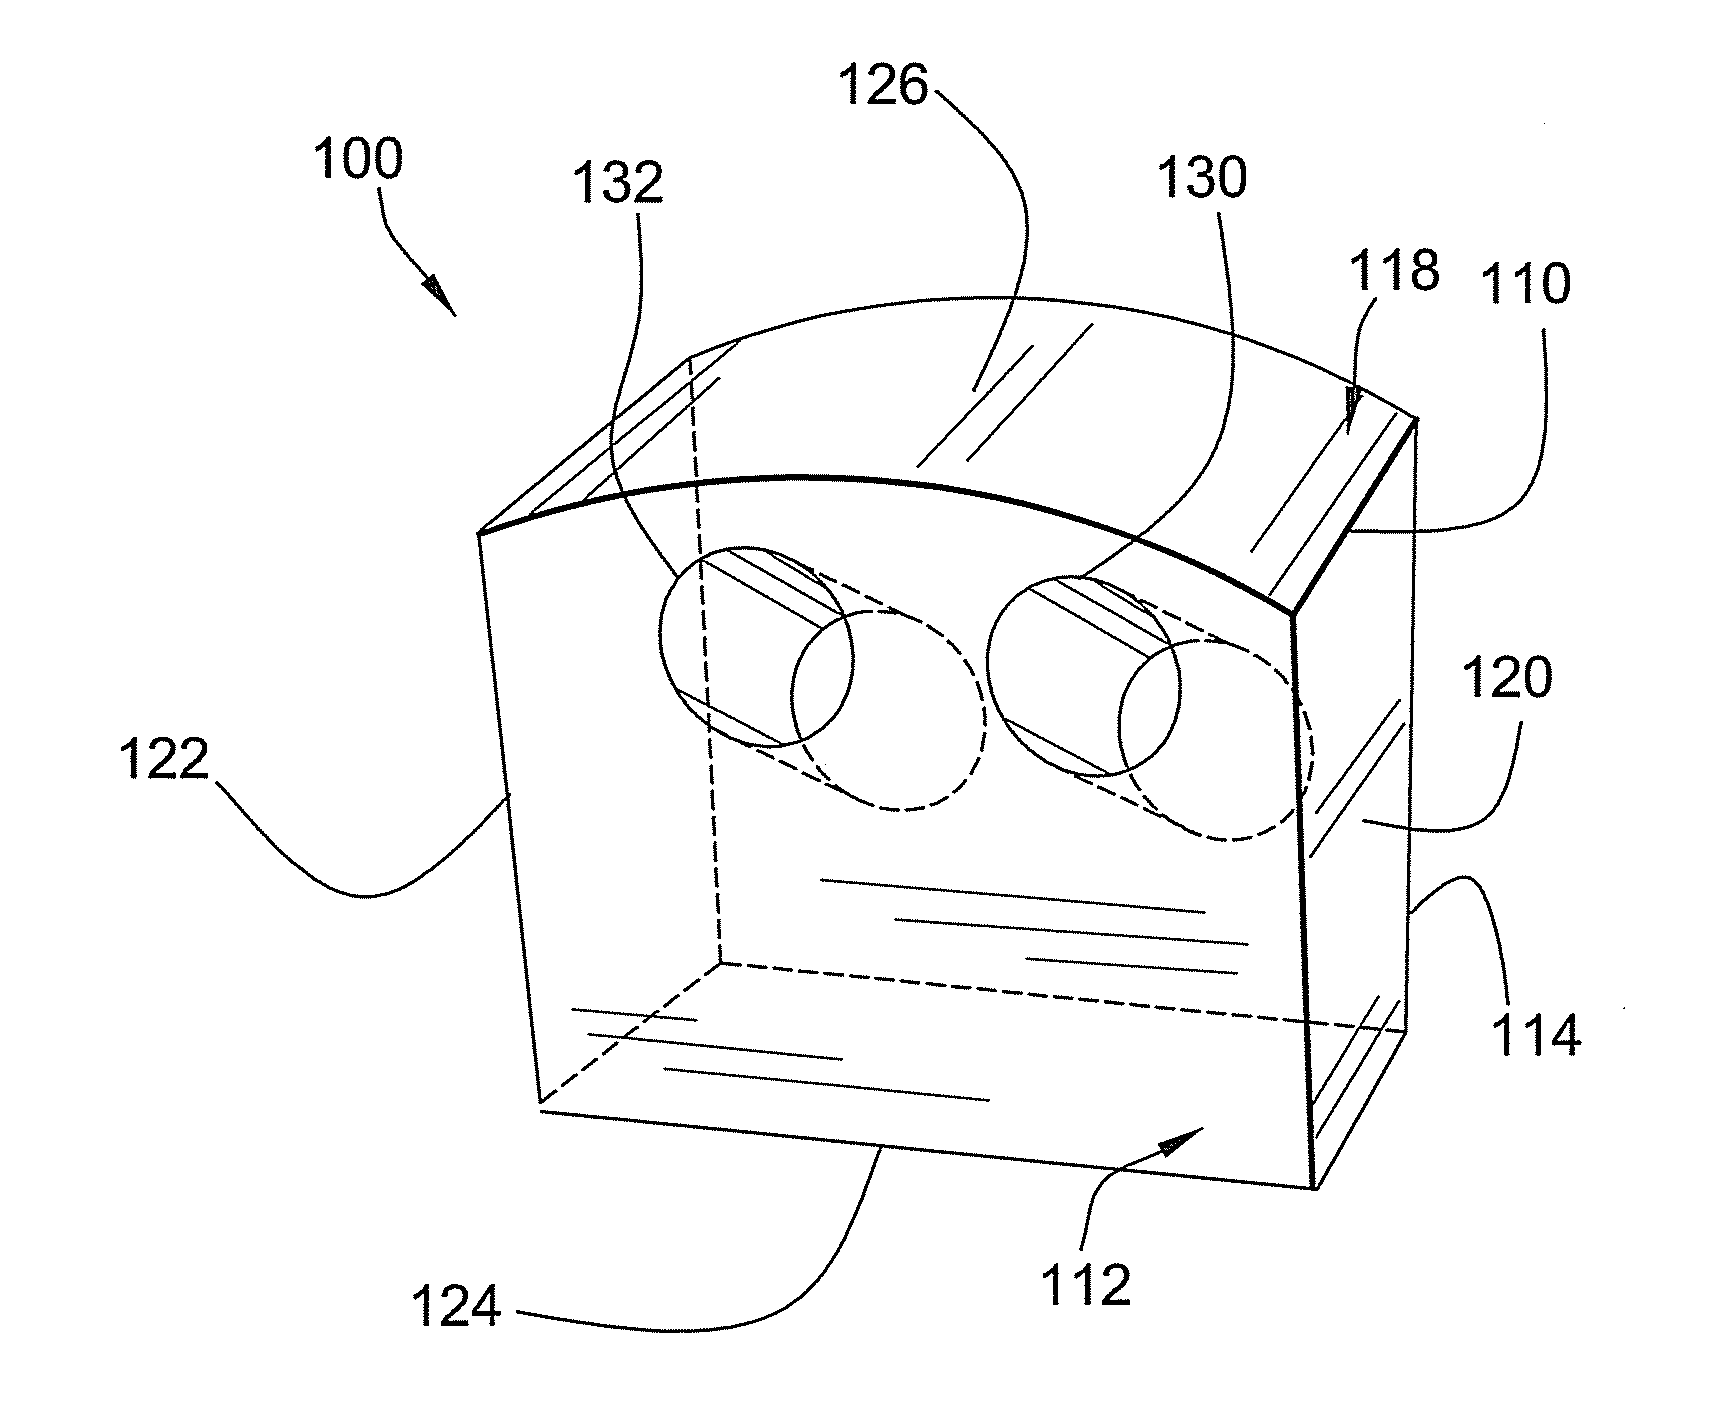 Invertebral spinal implant and method of making the same